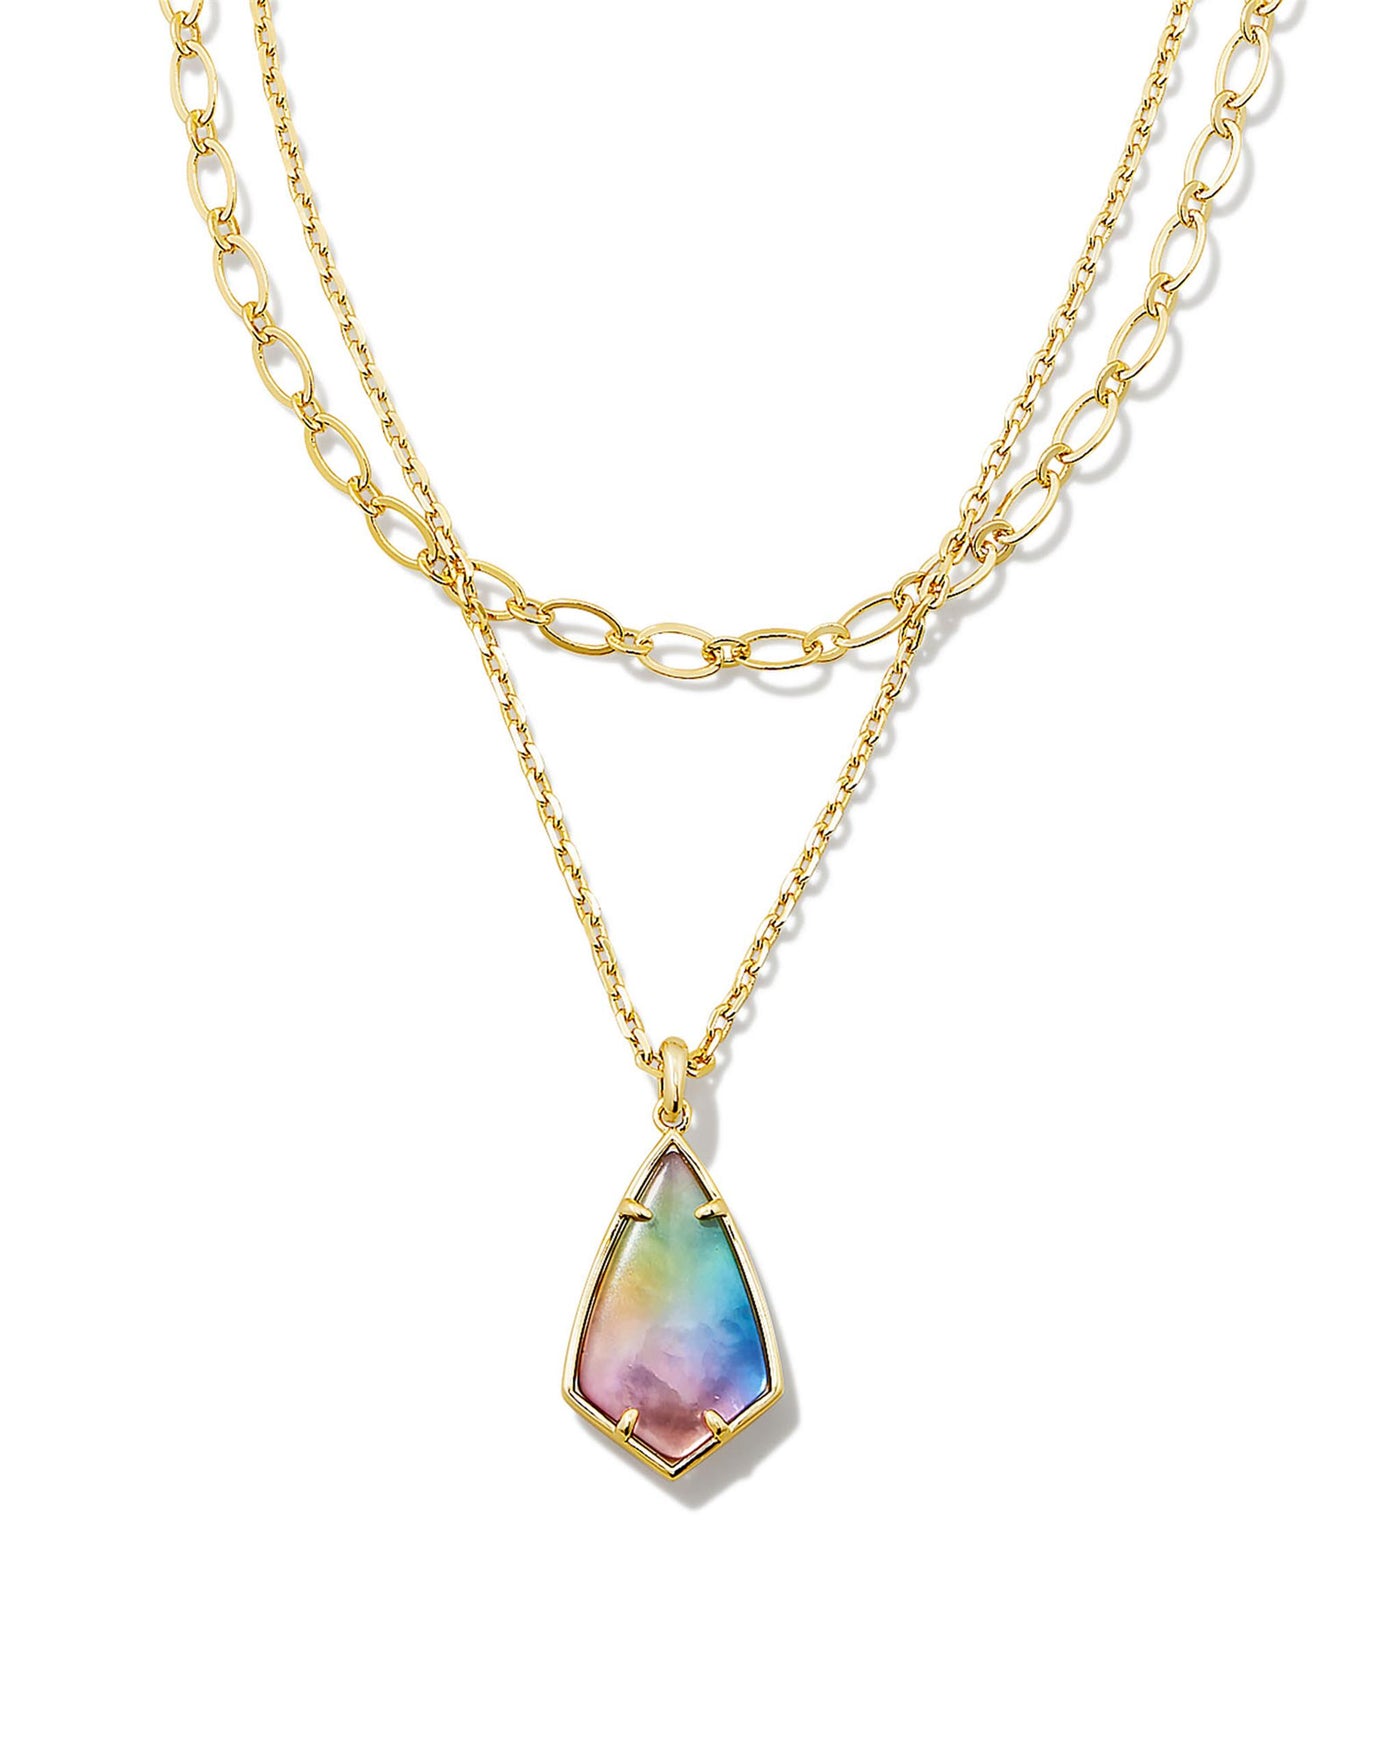 Gold Tone Necklace Featuring Water Color Illusion by Kendra Scott